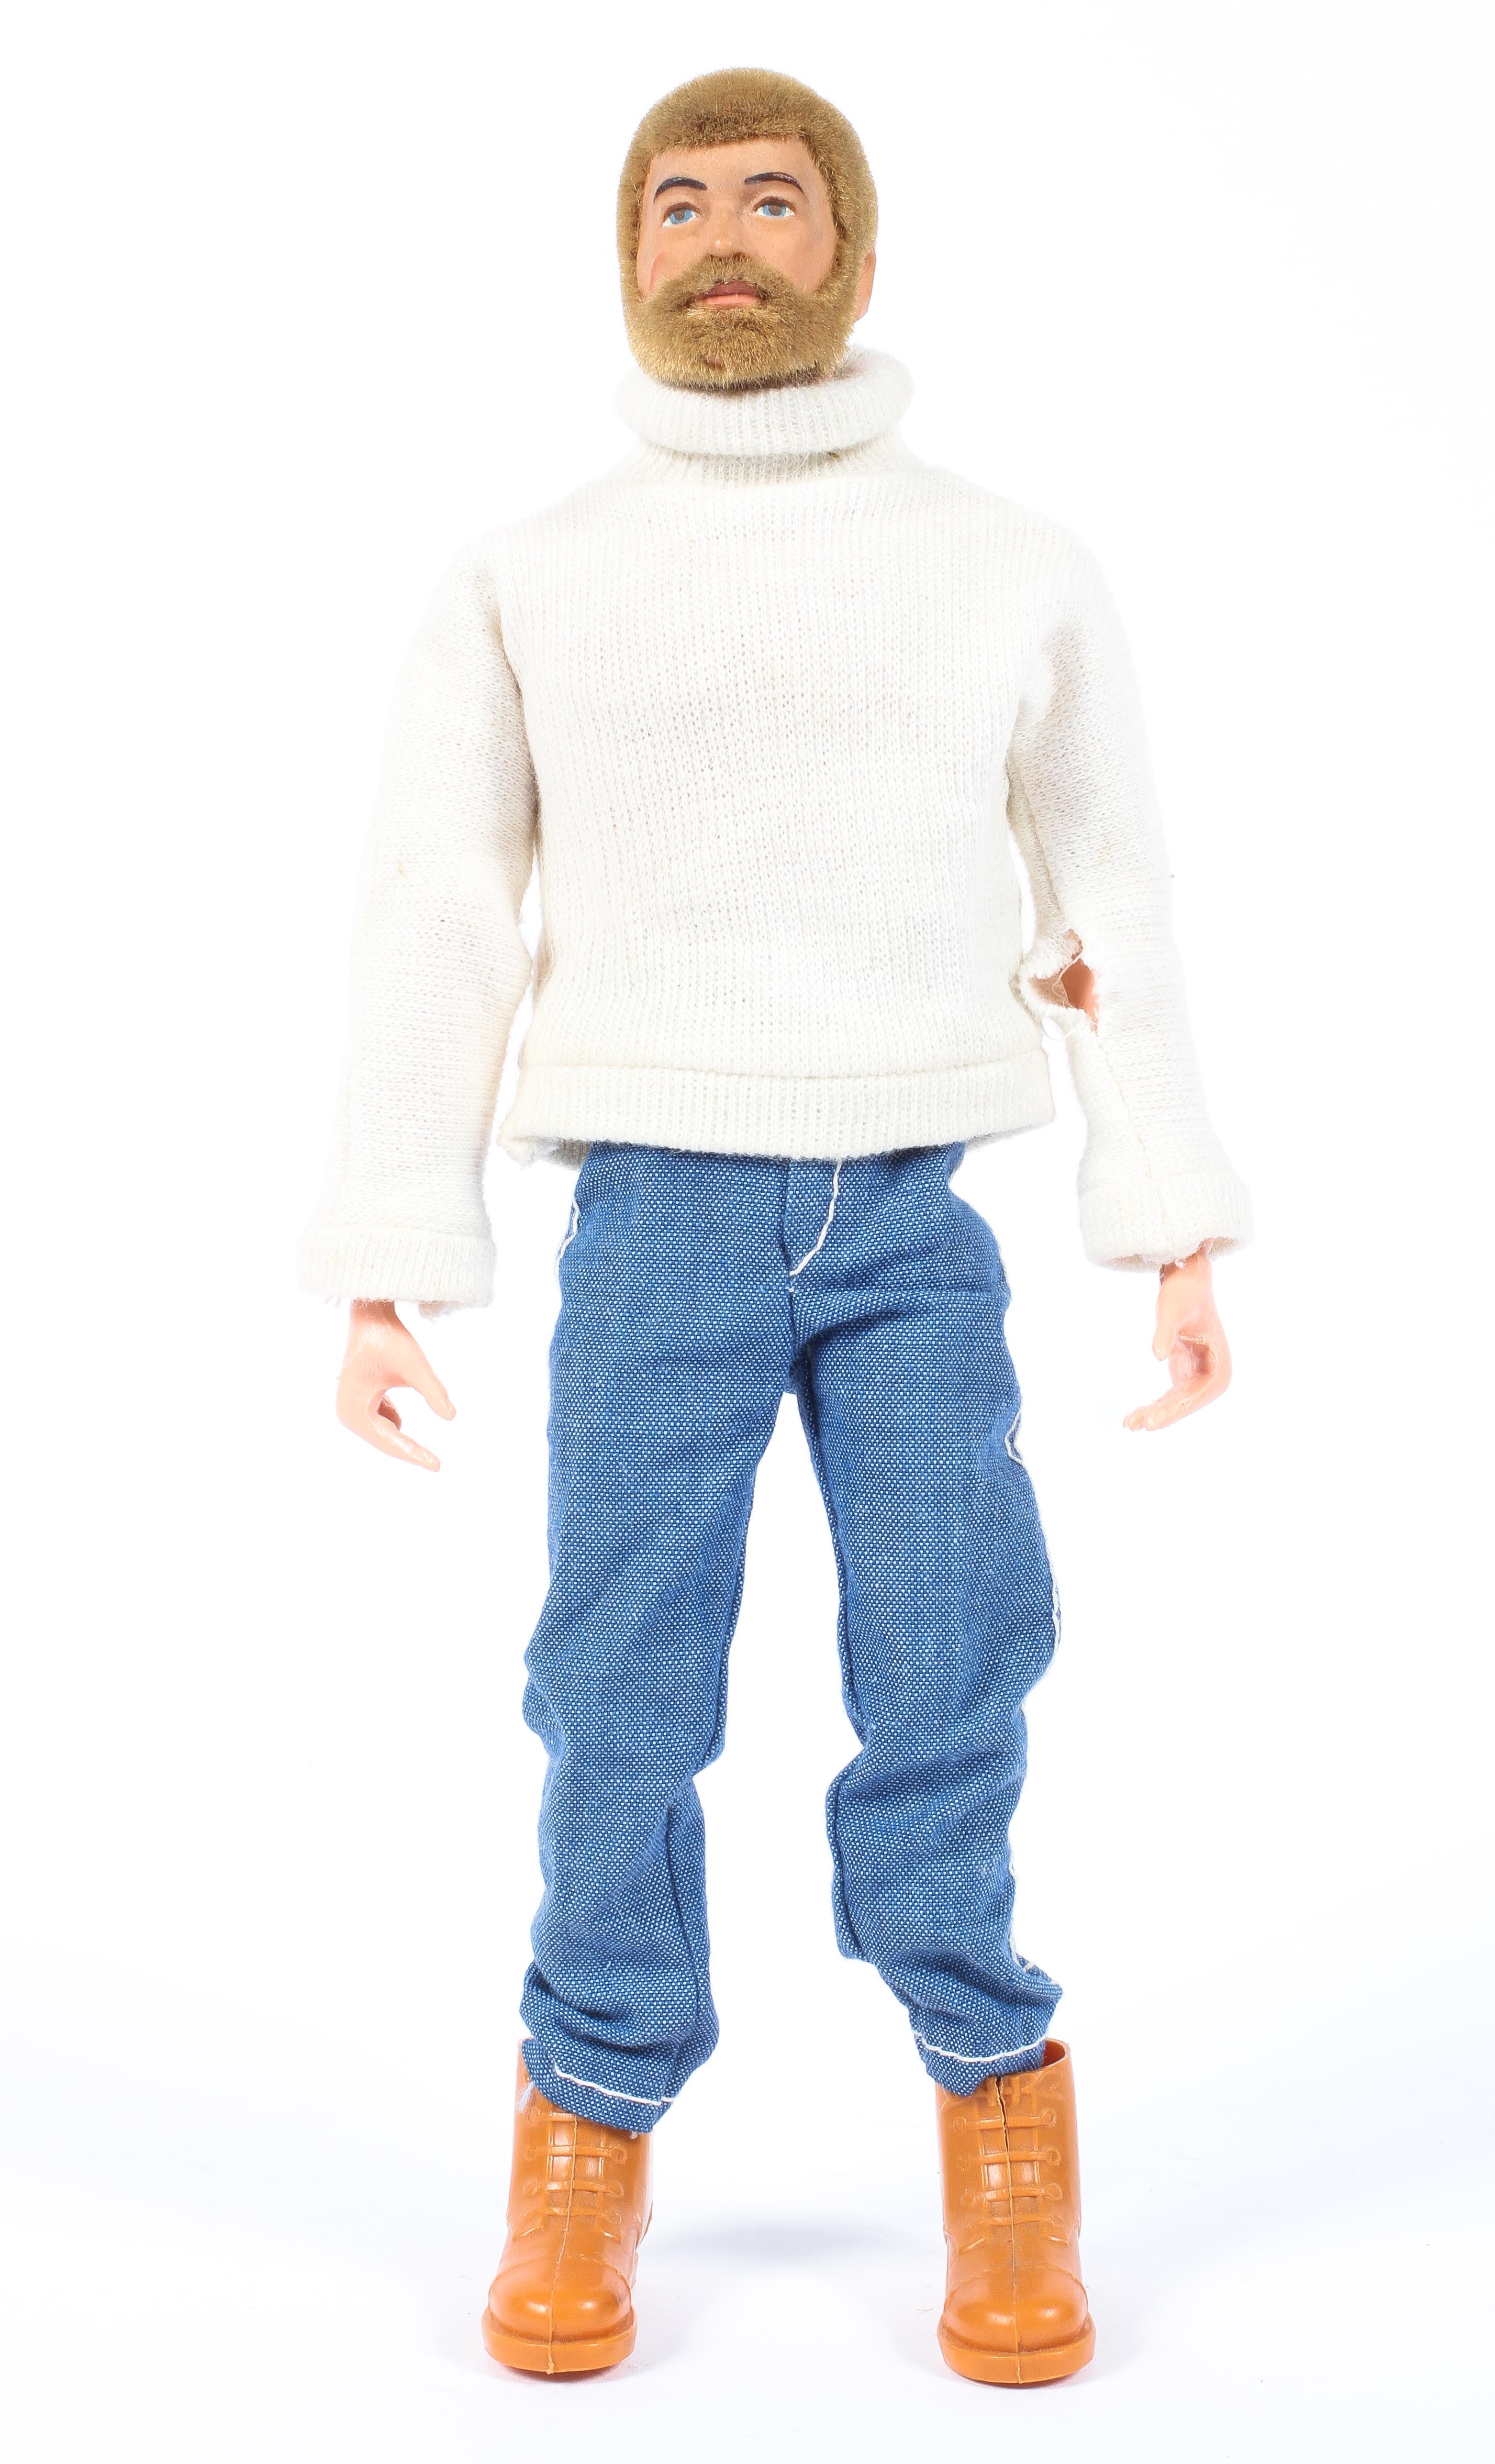 A vintage Action Man with blond hair and beard, in a roll neck sweater, jeans and boots,